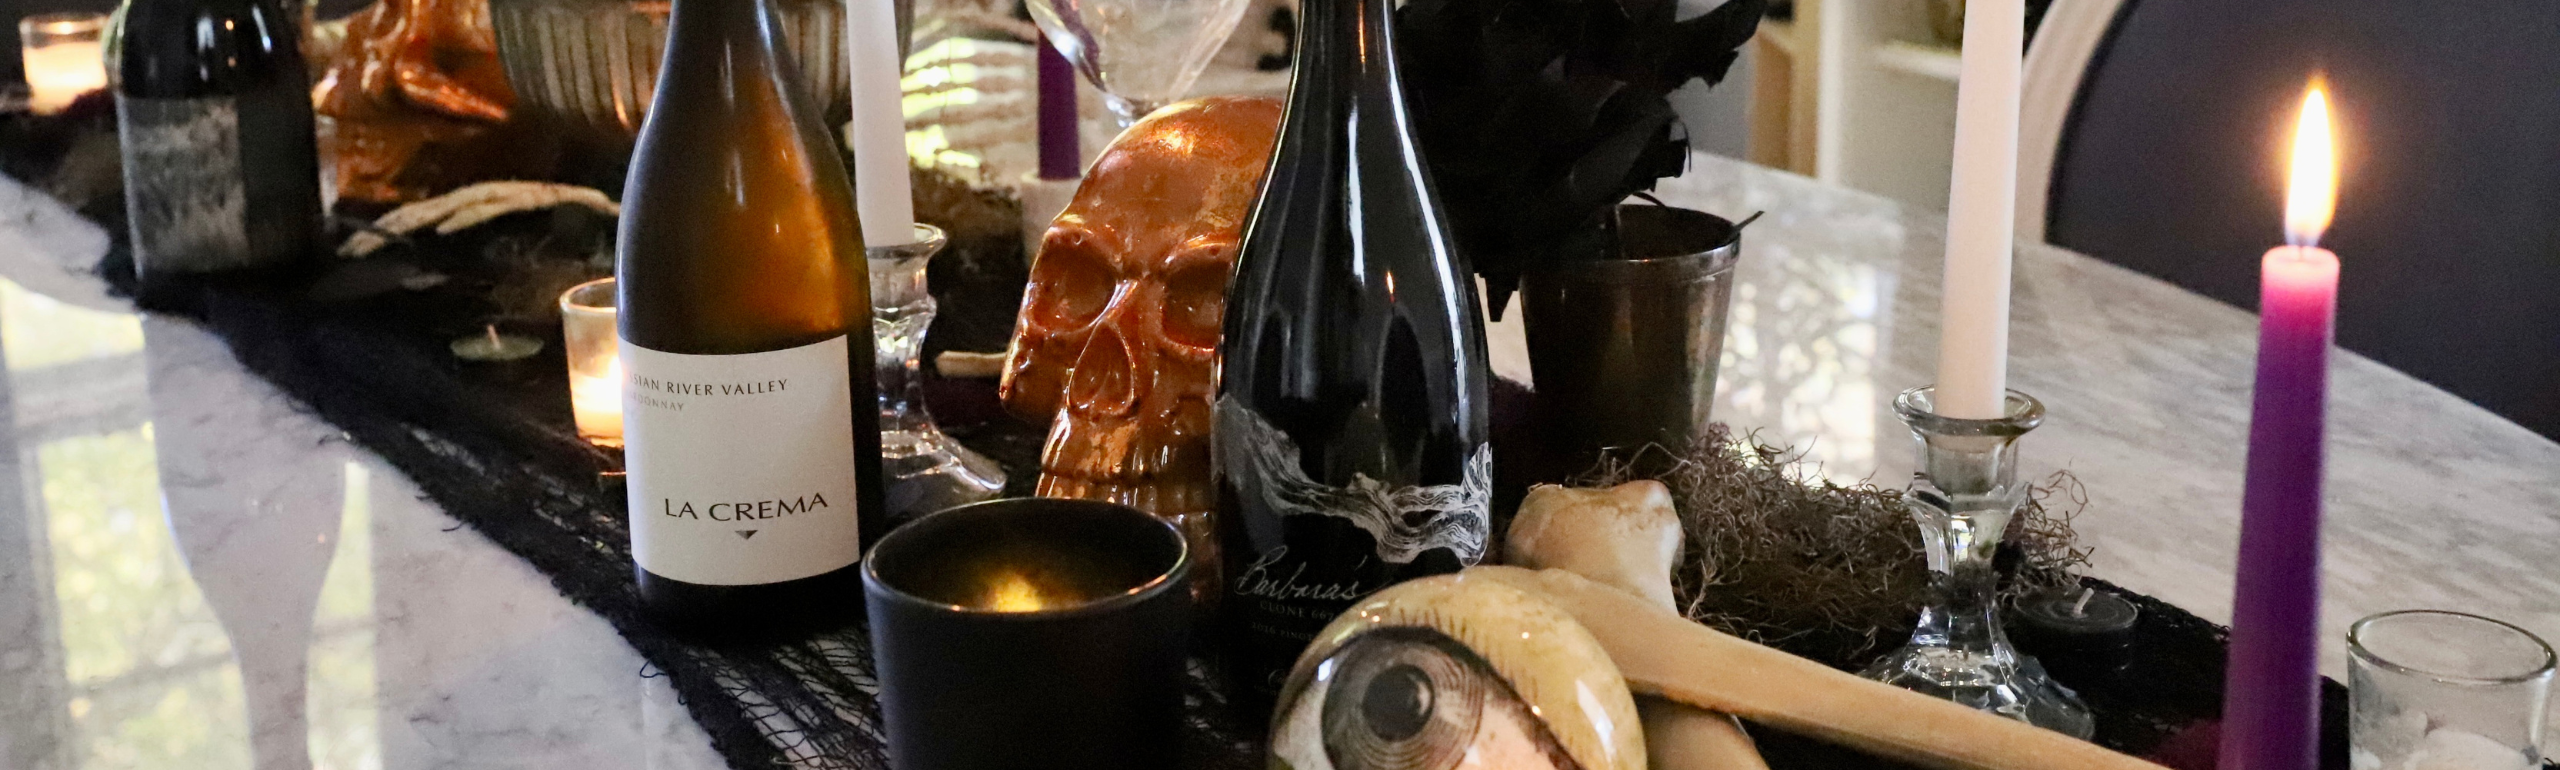 Bottles of wine on a spooky Halloween themed table set